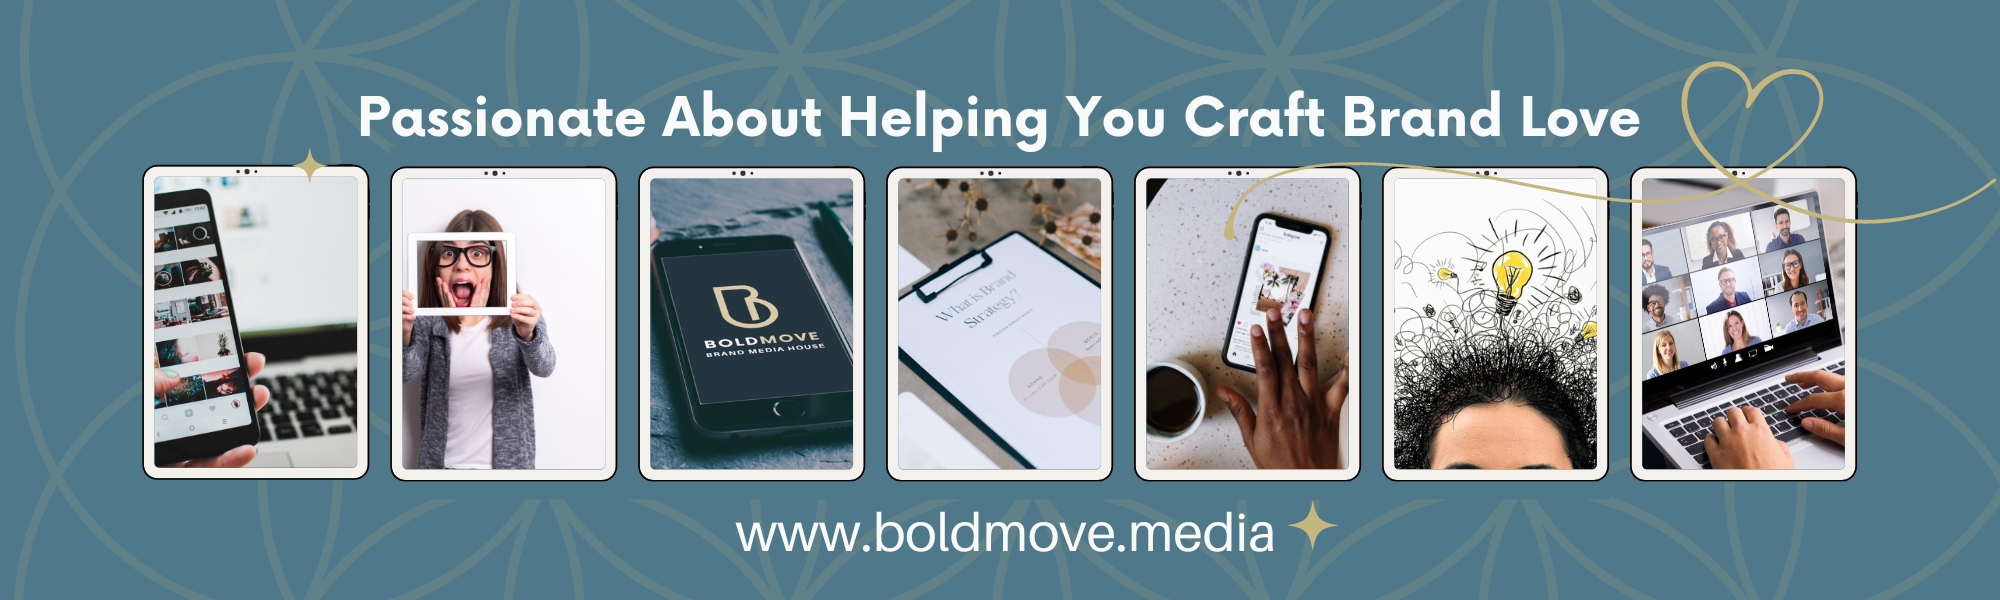 Passionate about helping you craft brand love